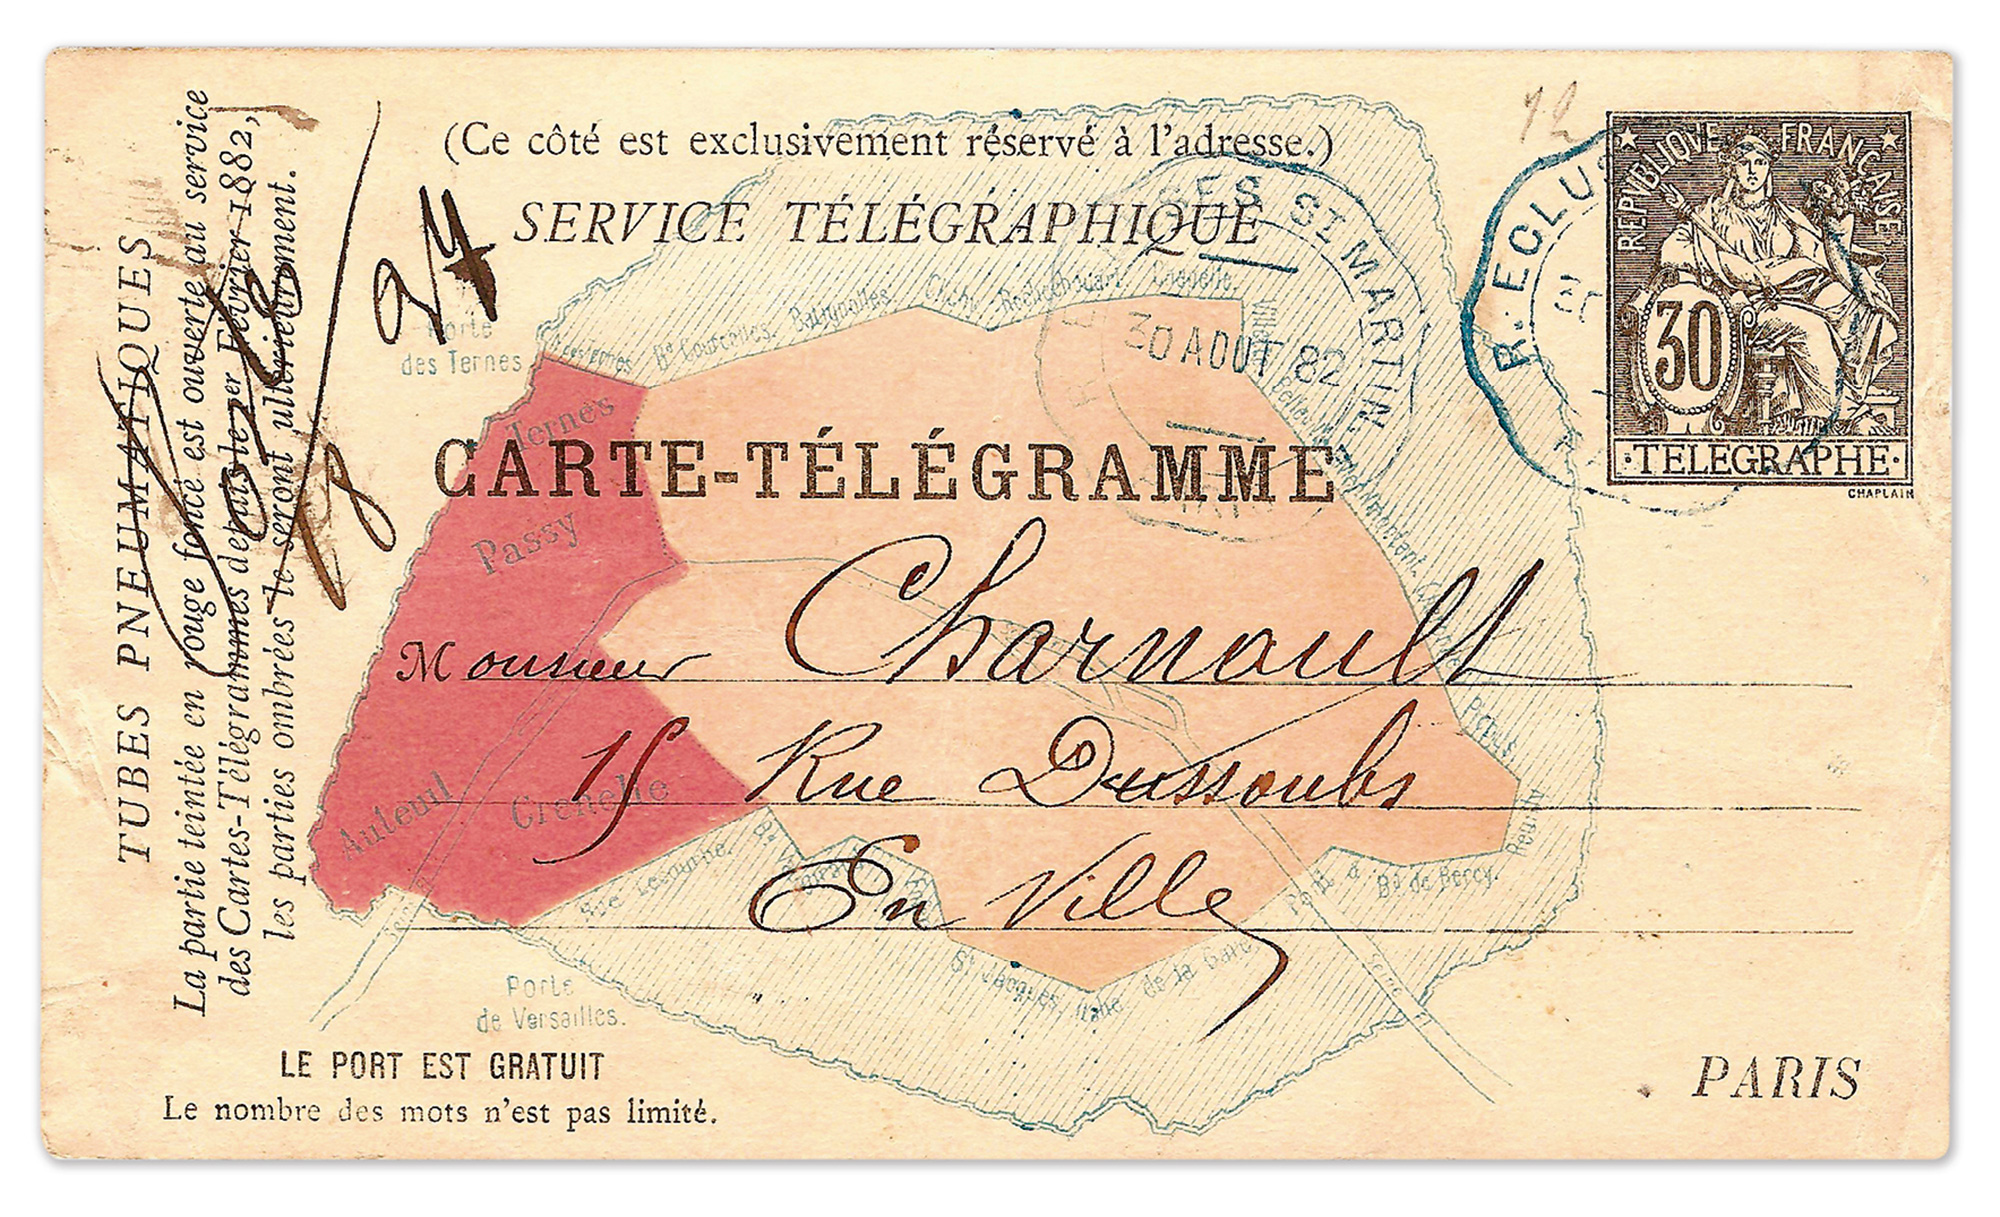 Piece of mail delivered by pneumatic post, August 1882. The map of Paris shows in red an area of the city that had begun to receive the service earlier that year. Note the legend at bottom left stating that there are no limits to the number of words that the sender can write on the reverse.